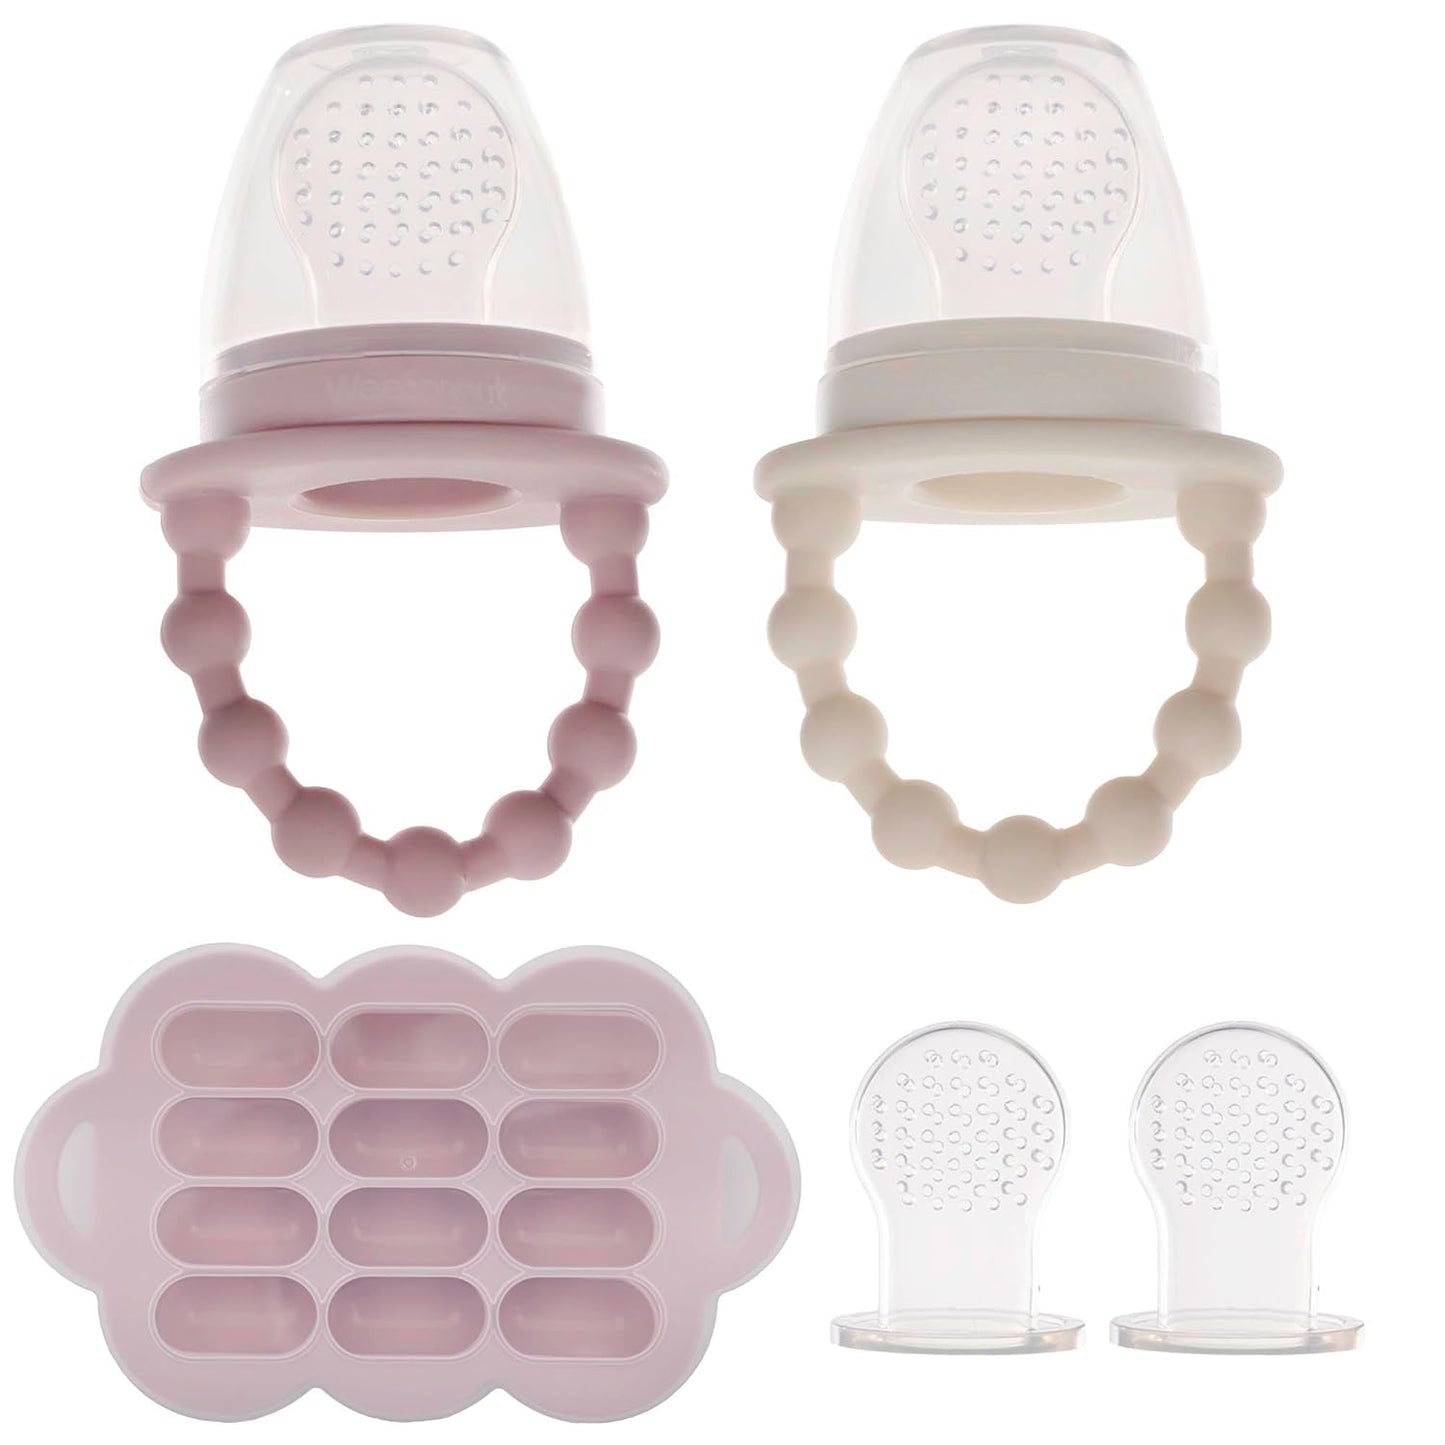 WeeSprout Baby Feeders: Set of 2 + Freezer Tray, Safe Food Introduction, Teething Toys, Bonus Pouches & Lids, Dishwasher Safe